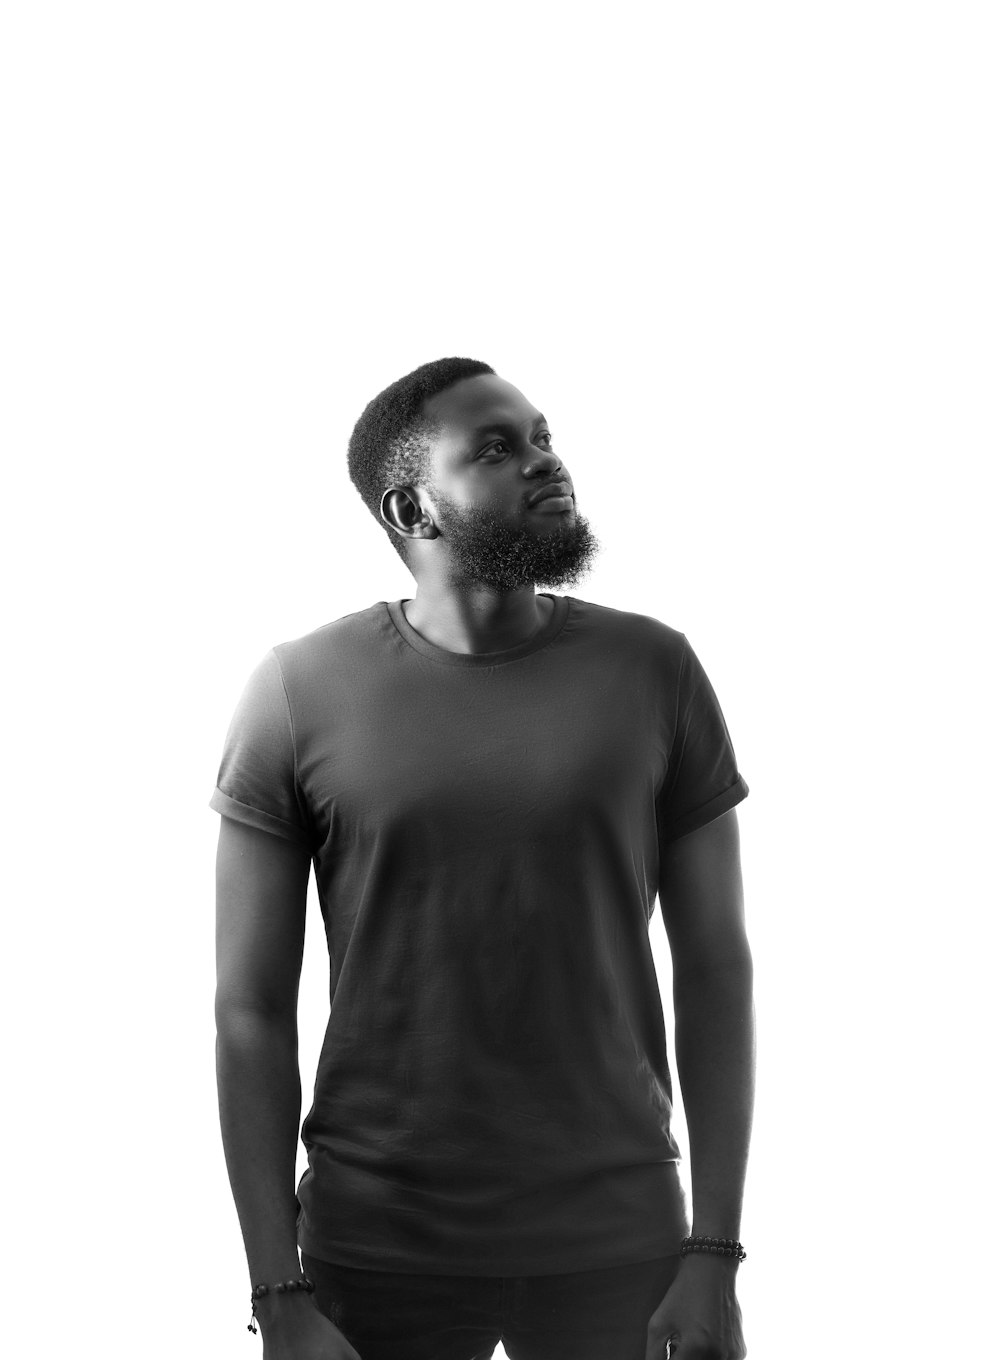 a man with a beard standing in front of a white background